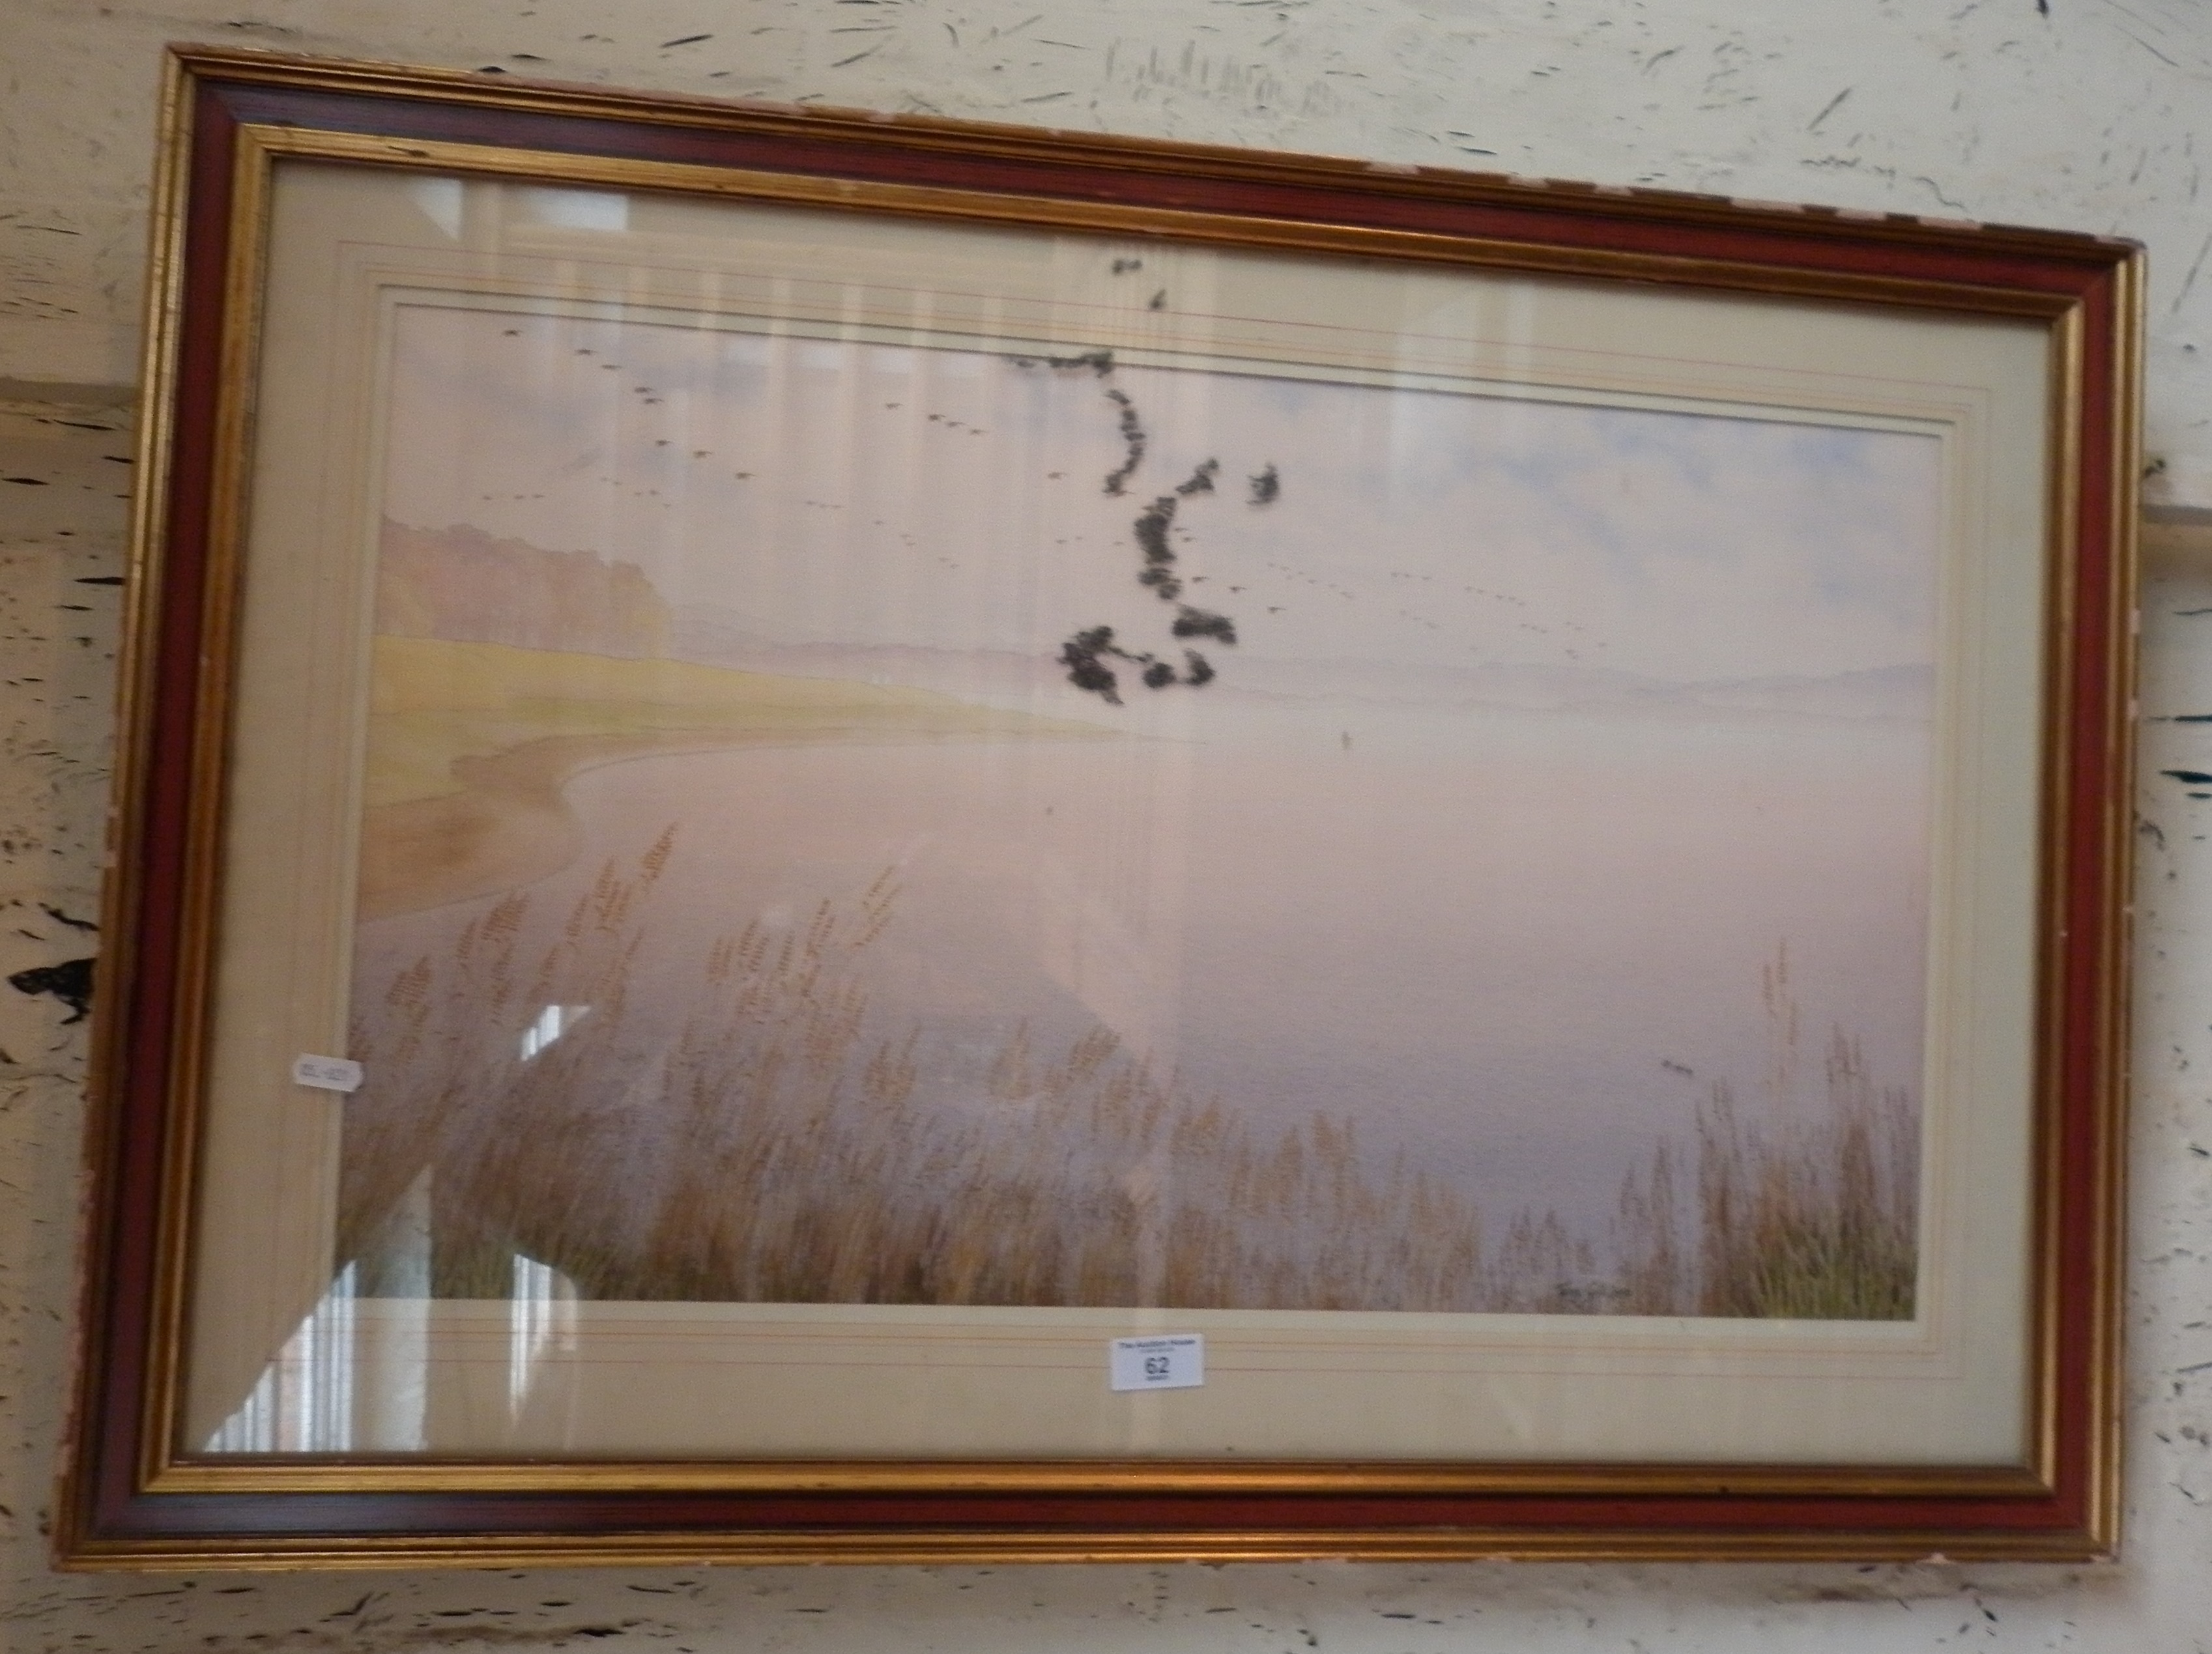 Watercolour of an estuary scene by Tony Gill dated 1991, 23" x 33" (dirt under glass)